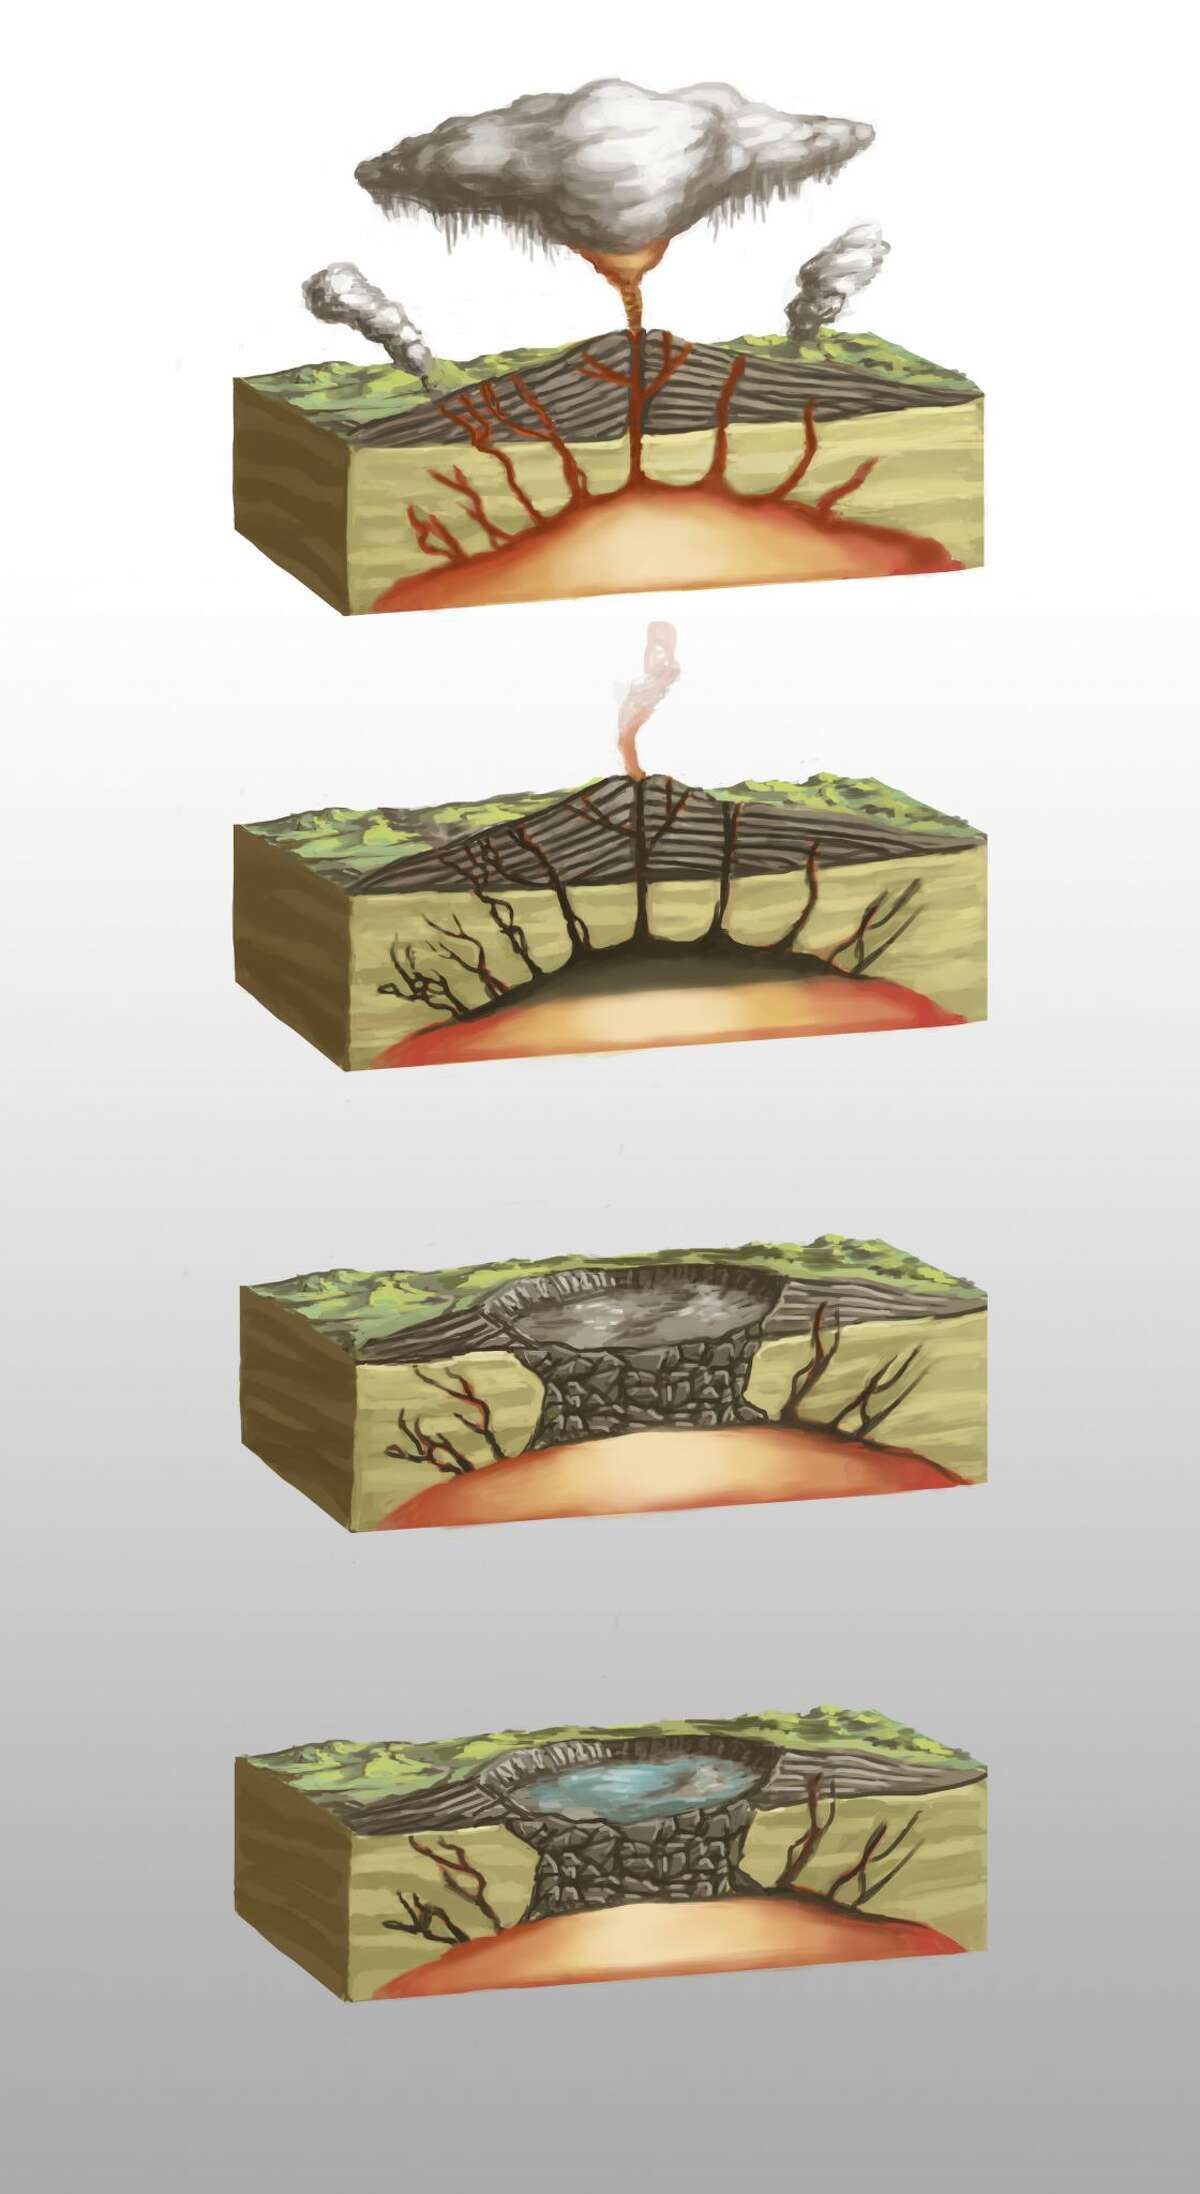 Illustration showing the formation of a caldera. At top a full magma chamber under pressure causes eruption. Second from top, magma chamber is now partially emptied and pressure is released. Third from top, volcano collapses into top of the magma chamber beginning to form the caldera. At bottom, large crater forms with a steep rim and usually fills with water.